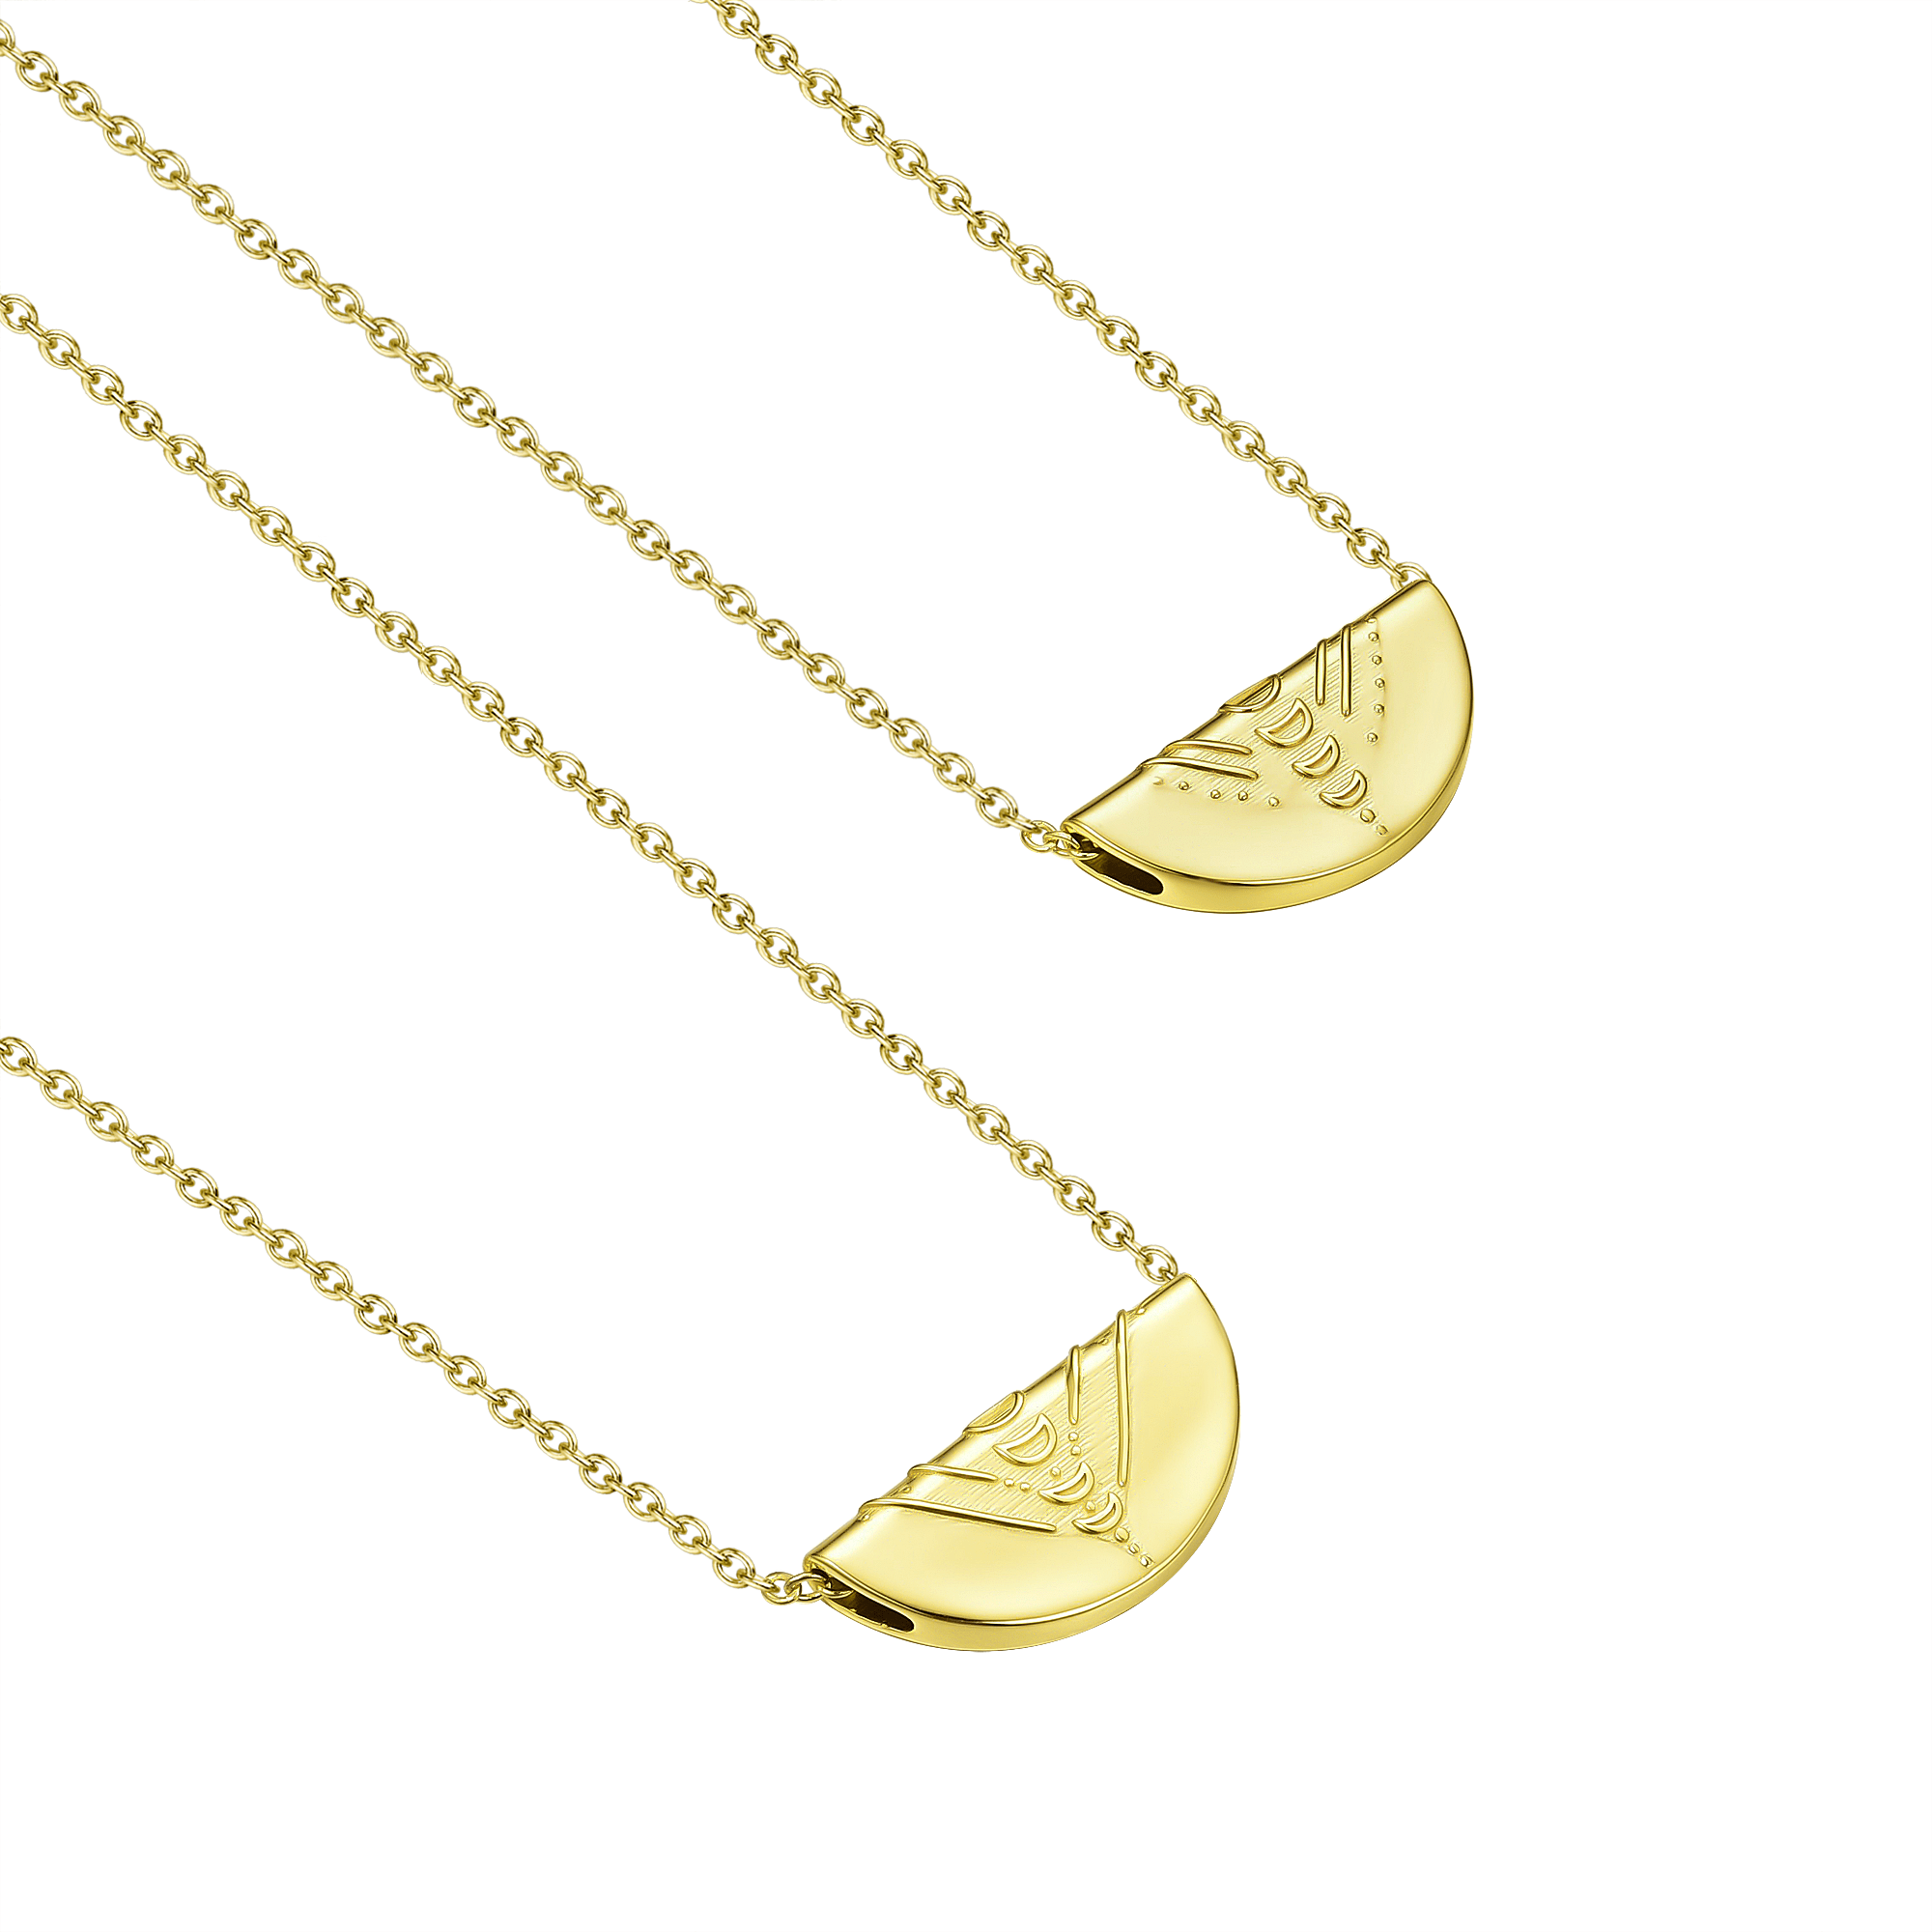 Growth Necklaces